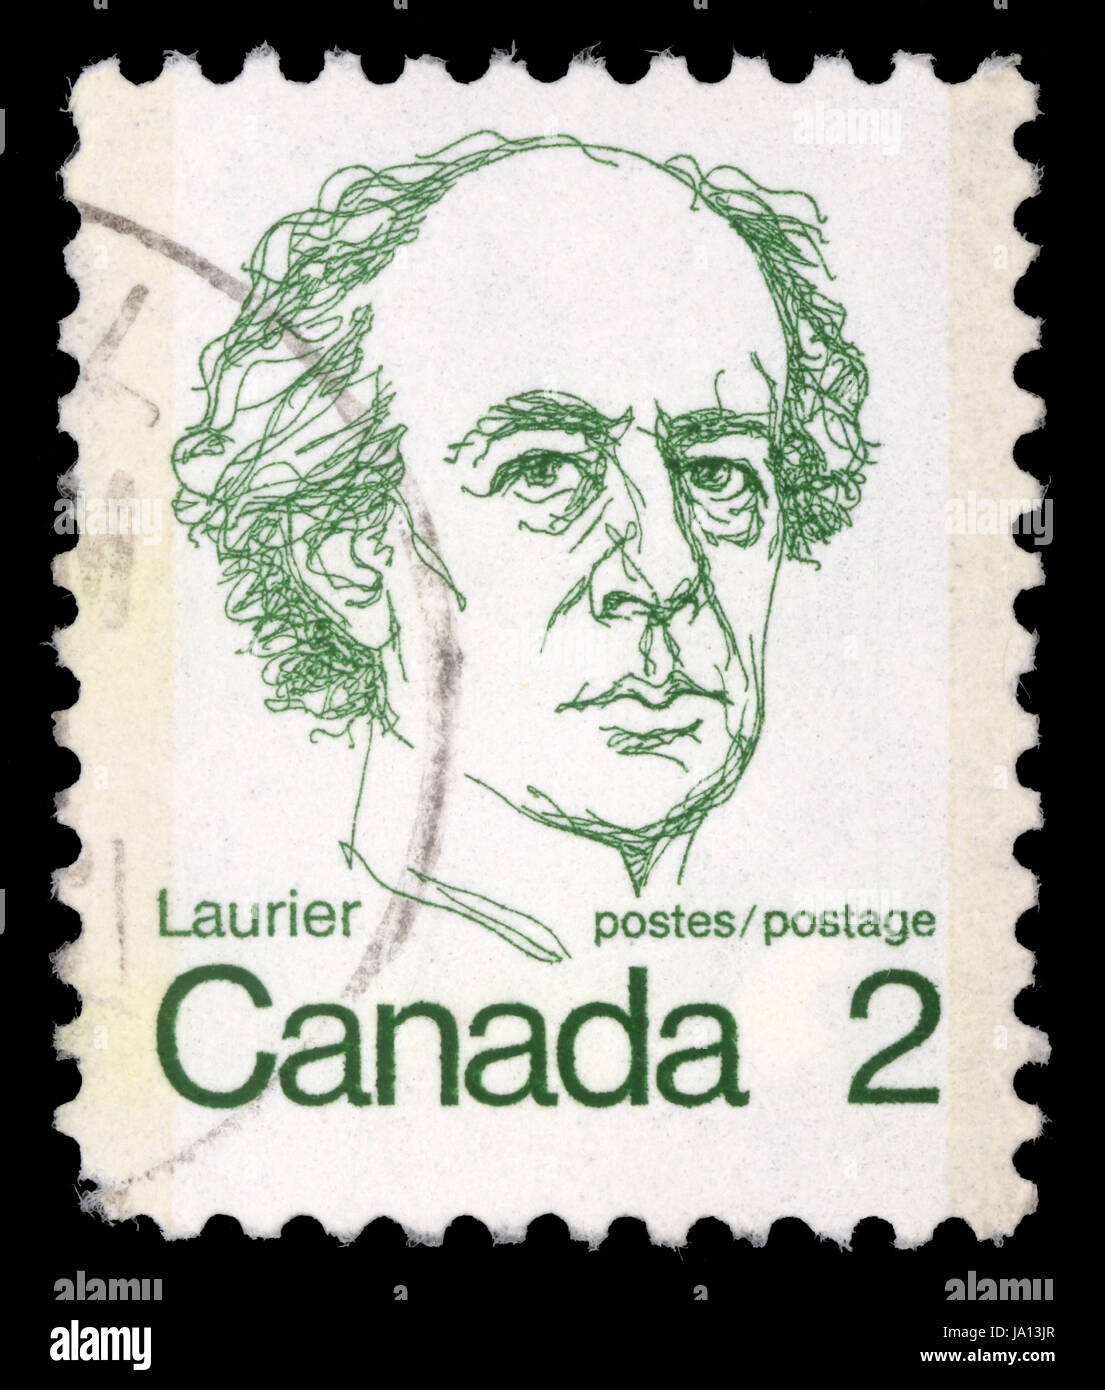 CANADA - CIRCA 1972: A stamp printed in Canada shows a portrait of Canadian Prime Minister Sir Wilfrid Laurier, circa 1972. Stock Photo